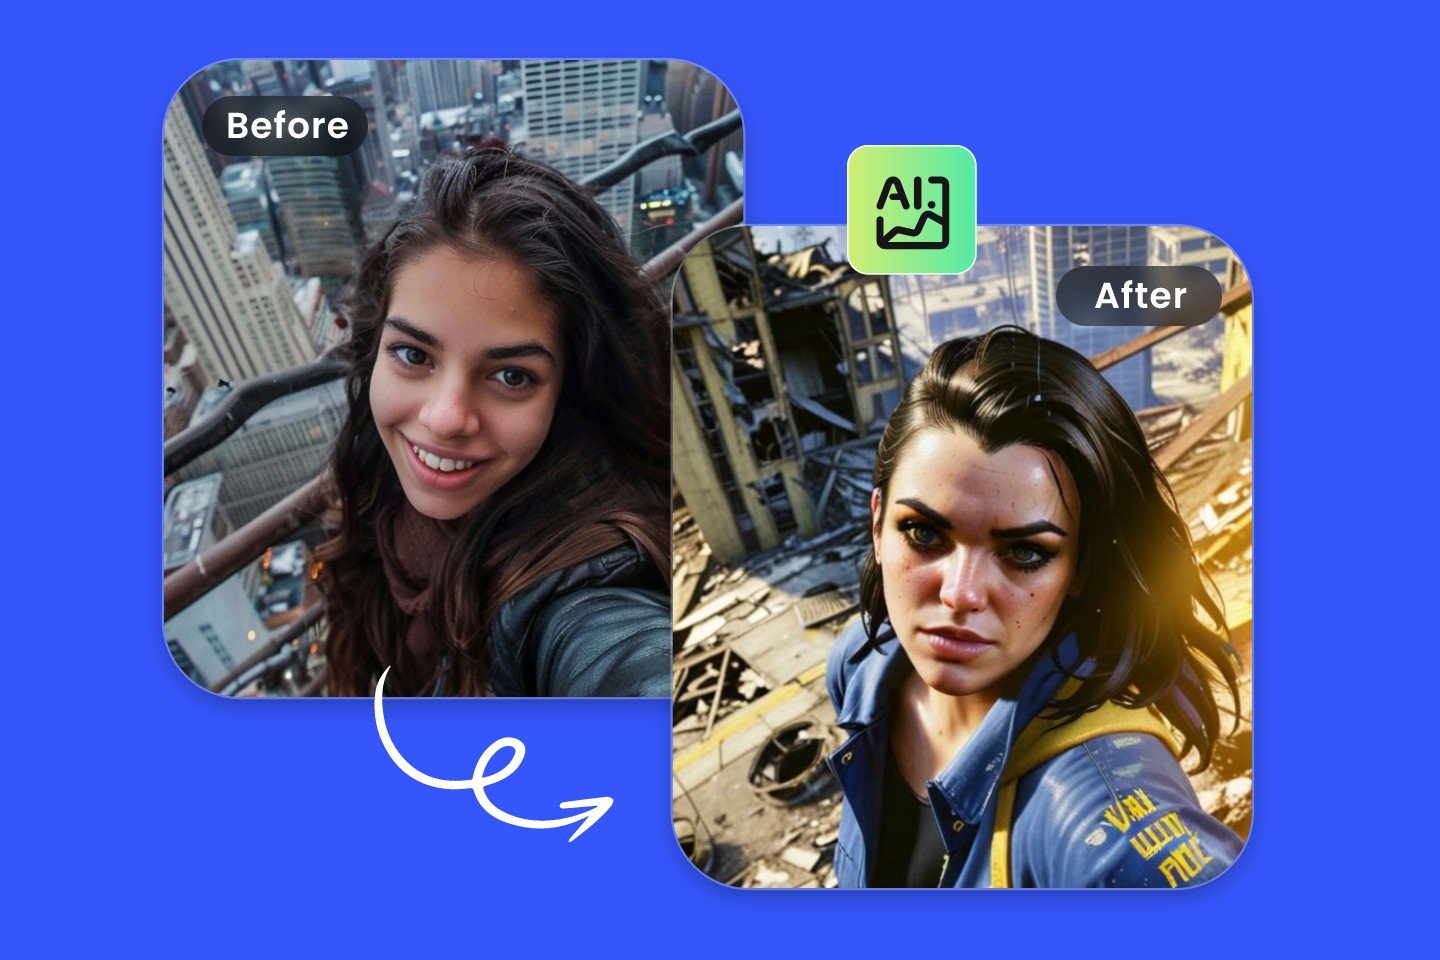 Turn the female selfie into the Fallout post apocalyptic style character with fotors ai fallout filter